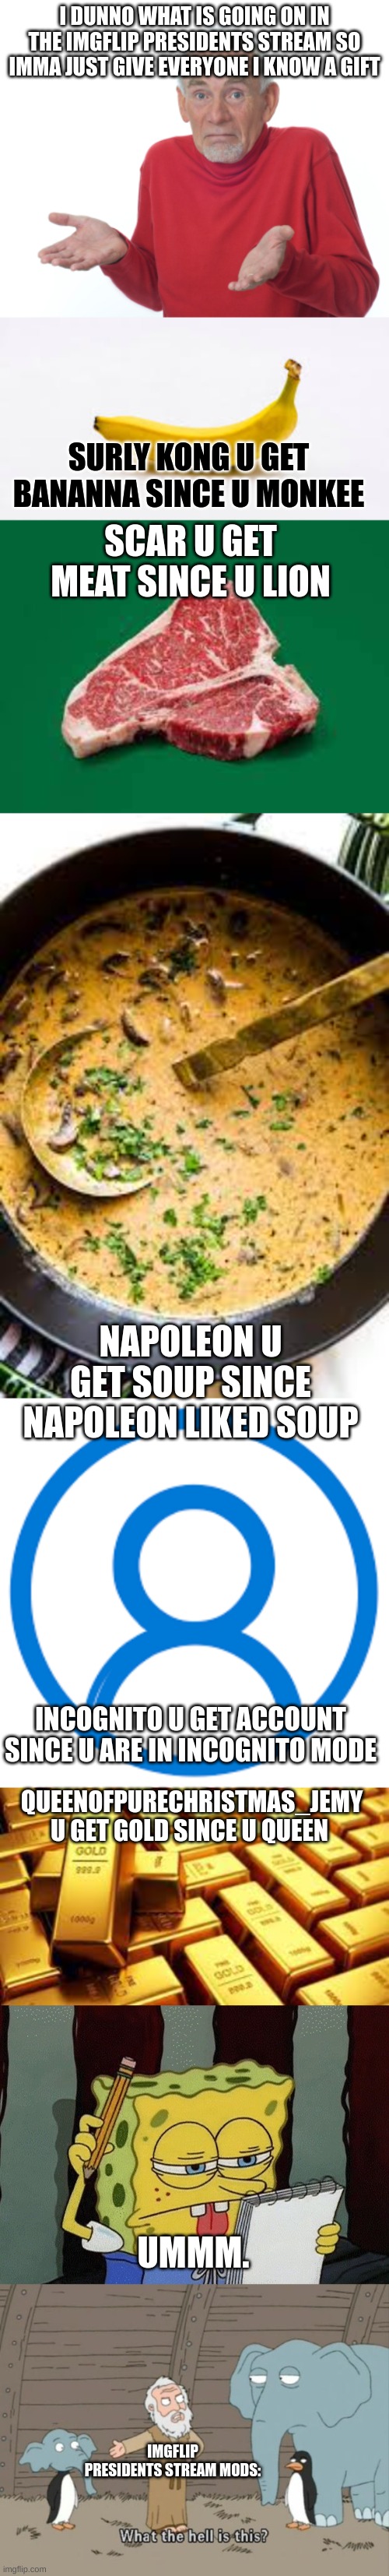 before u ask in comments: ur welcome | I DUNNO WHAT IS GOING ON IN THE IMGFLIP PRESIDENTS STREAM SO IMMA JUST GIVE EVERYONE I KNOW A GIFT; SURLY KONG U GET BANANNA SINCE U MONKEE; SCAR U GET MEAT SINCE U LION; NAPOLEON U GET SOUP SINCE NAPOLEON LIKED SOUP; INCOGNITO U GET ACCOUNT SINCE U ARE IN INCOGNITO MODE; QUEENOFPURECHRISTMAS_JEMY U GET GOLD SINCE U QUEEN; UMMM. IMGFLIP PRESIDENTS STREAM MODS: | image tagged in guess i'll die,spongebob thinking,what the hell is this,incognito,napoleon | made w/ Imgflip meme maker